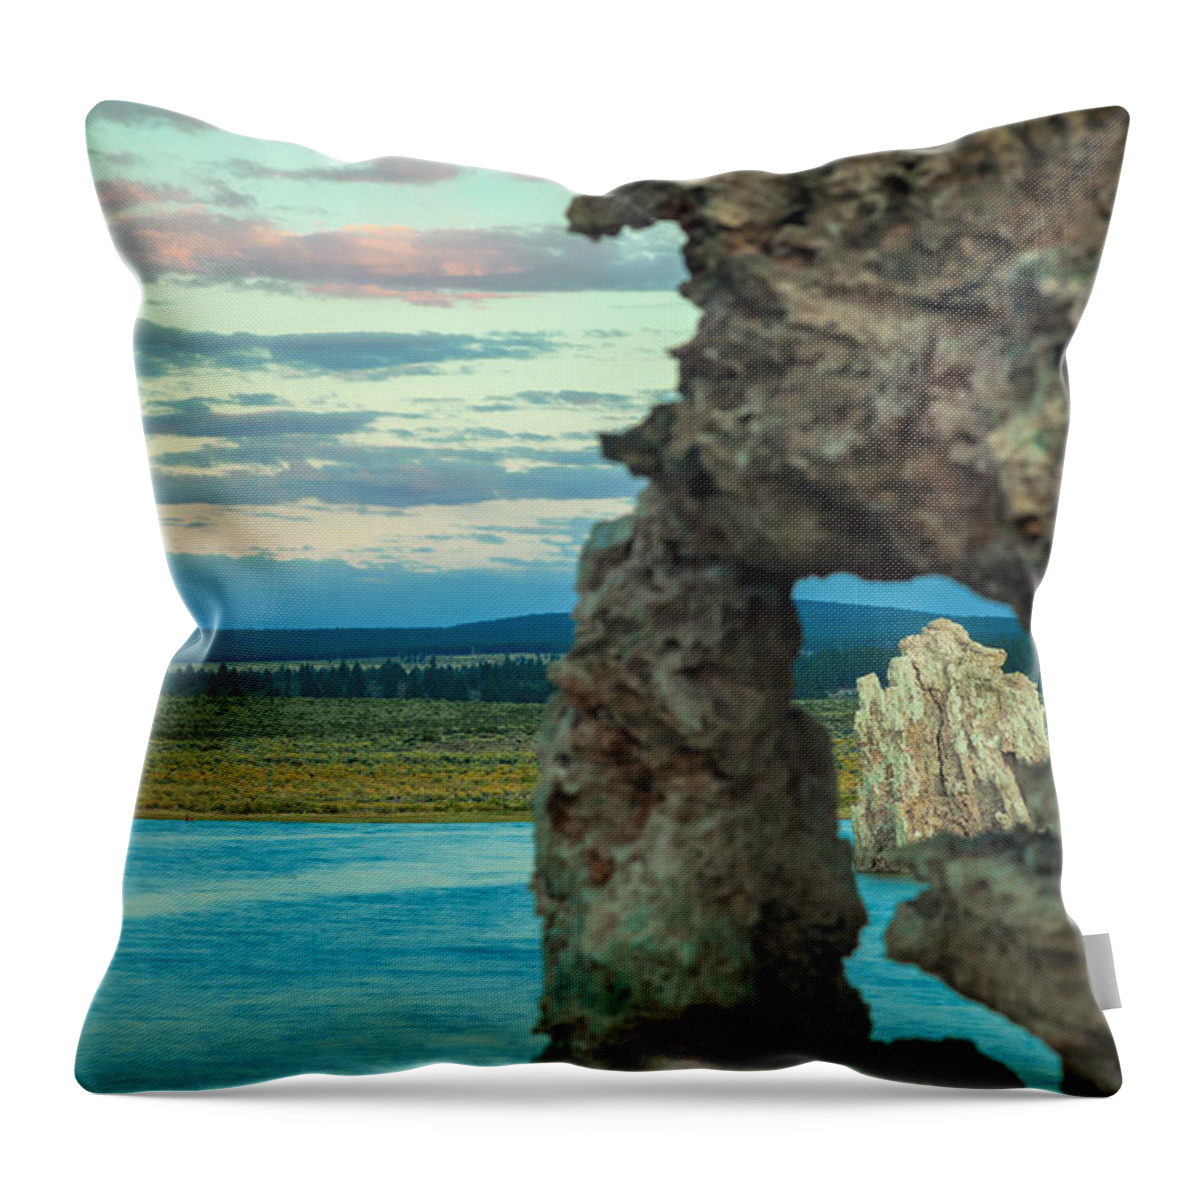 Landscape Throw Pillow featuring the photograph Through A Wormhole by Jonathan Nguyen